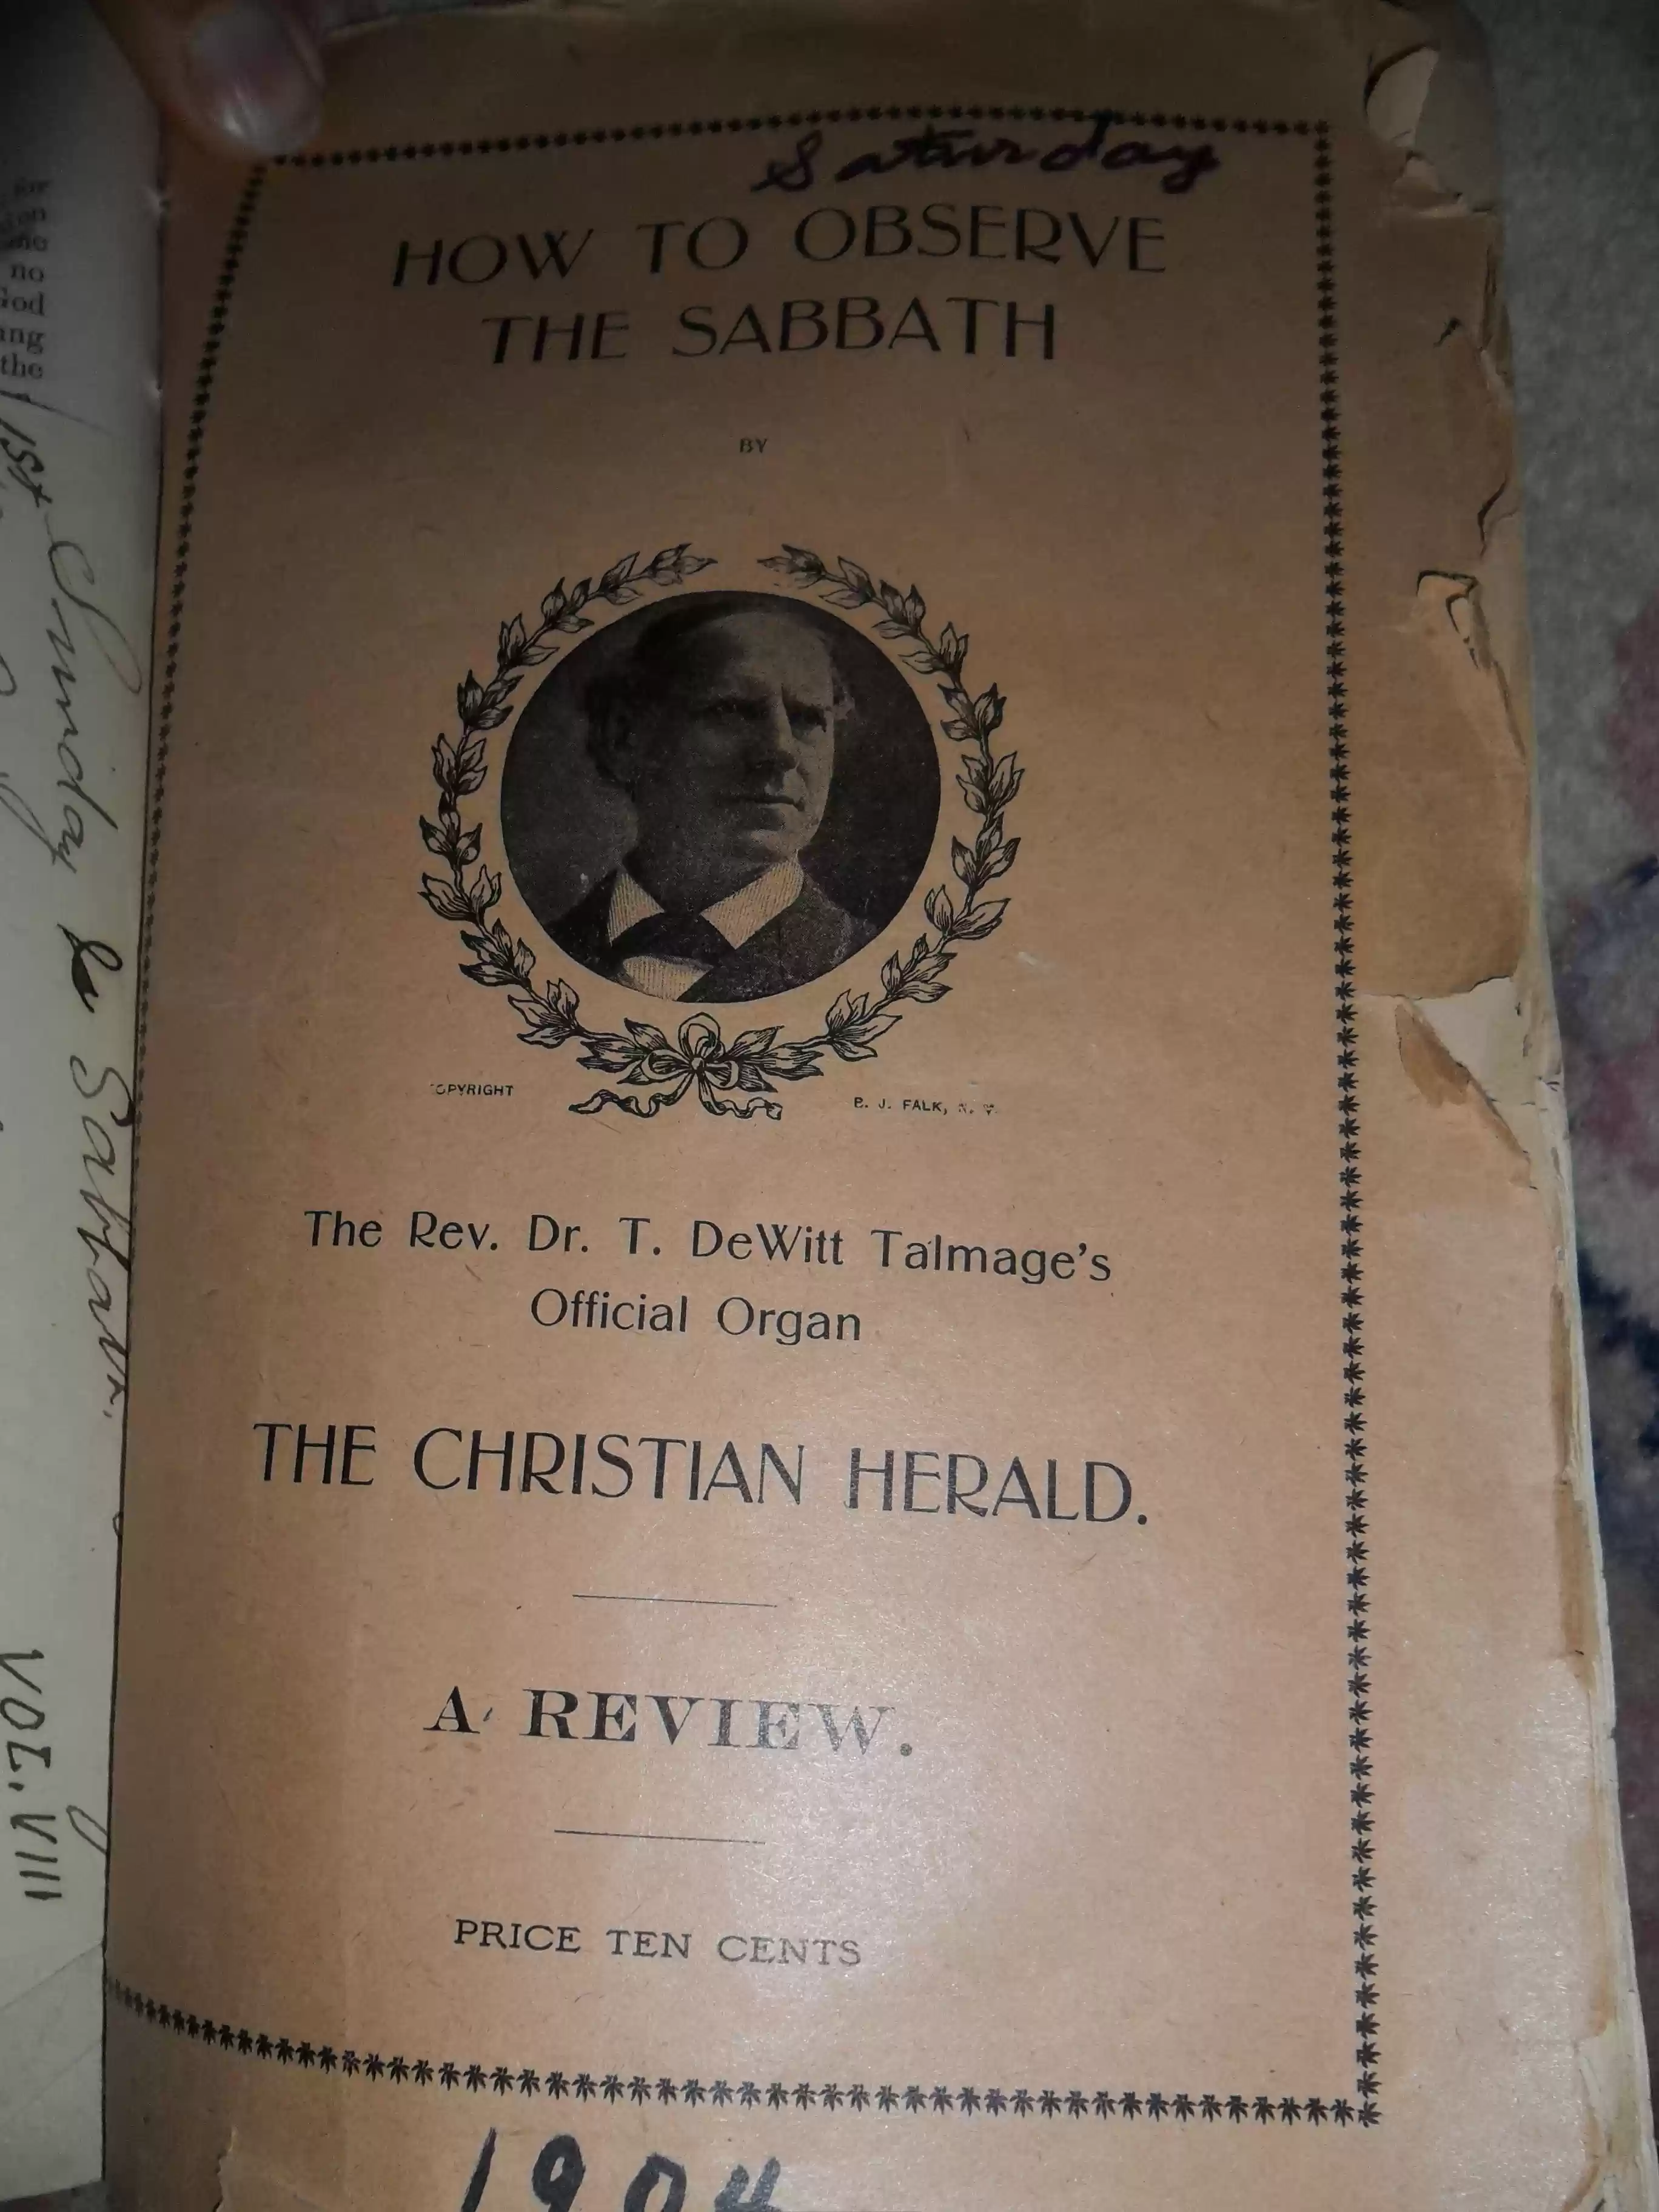 SAM_0520-Old book, How to Observe the Sabbath by Talmage. Written in 1904